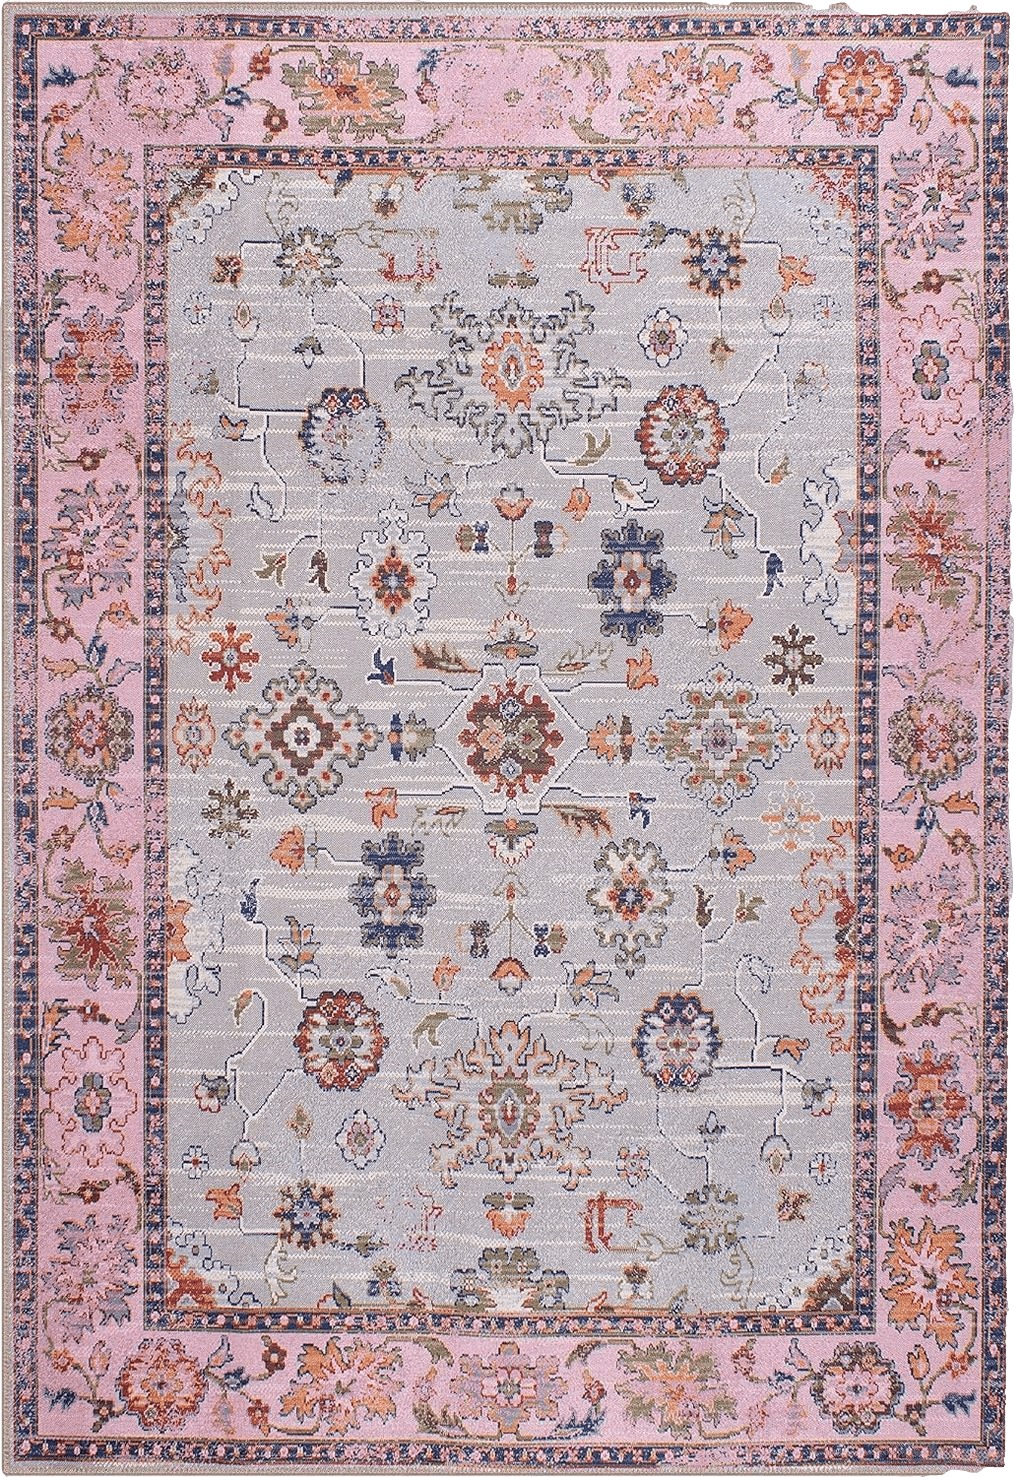 GLN Rugs Machine Washable Area Rug, Rugs for Living Room, Rugs for Bedroom, Bathroom Rug, Kitchen Rug, Printed Vintage Rug, Home Decor Traditional Carpet (2' x 3')